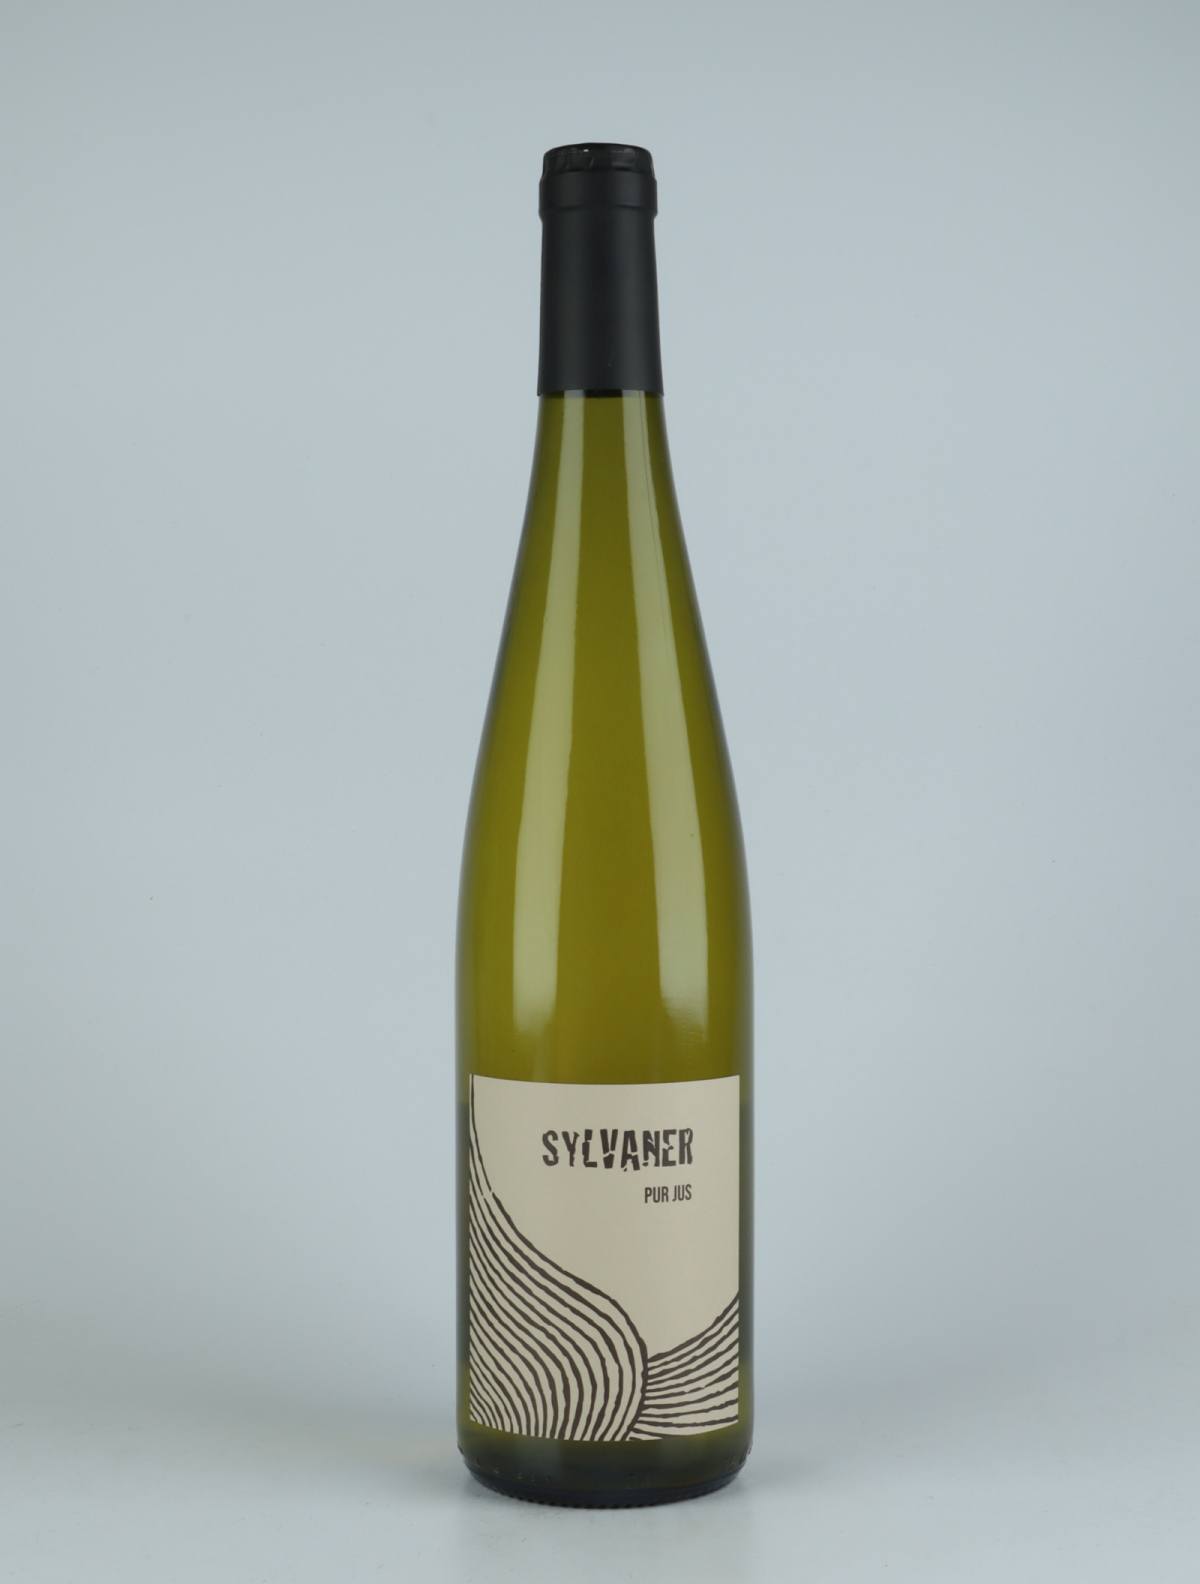 A bottle 2019 Pur Jus Sylvaner White wine from Ruhlmann Dirringer, Alsace in France